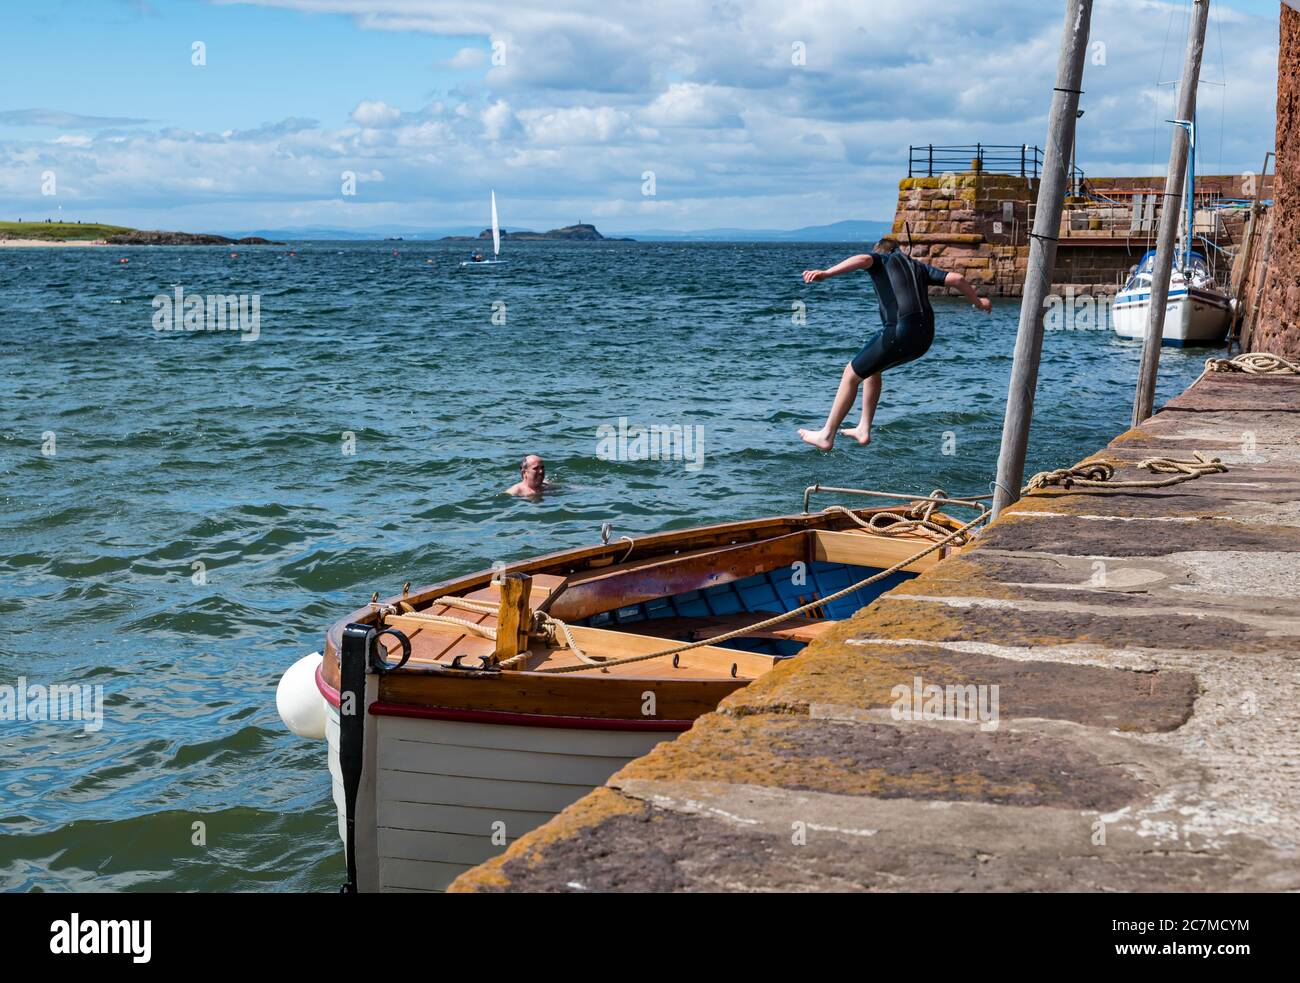 North Berwick, East Lothian, Scotland, United Kingdom, 18th July 2020. UK Weather: Summer sunshine in the seaside town. A boy jumps off the harbour wall into the Firth of Forth in West Bay Stock Photo